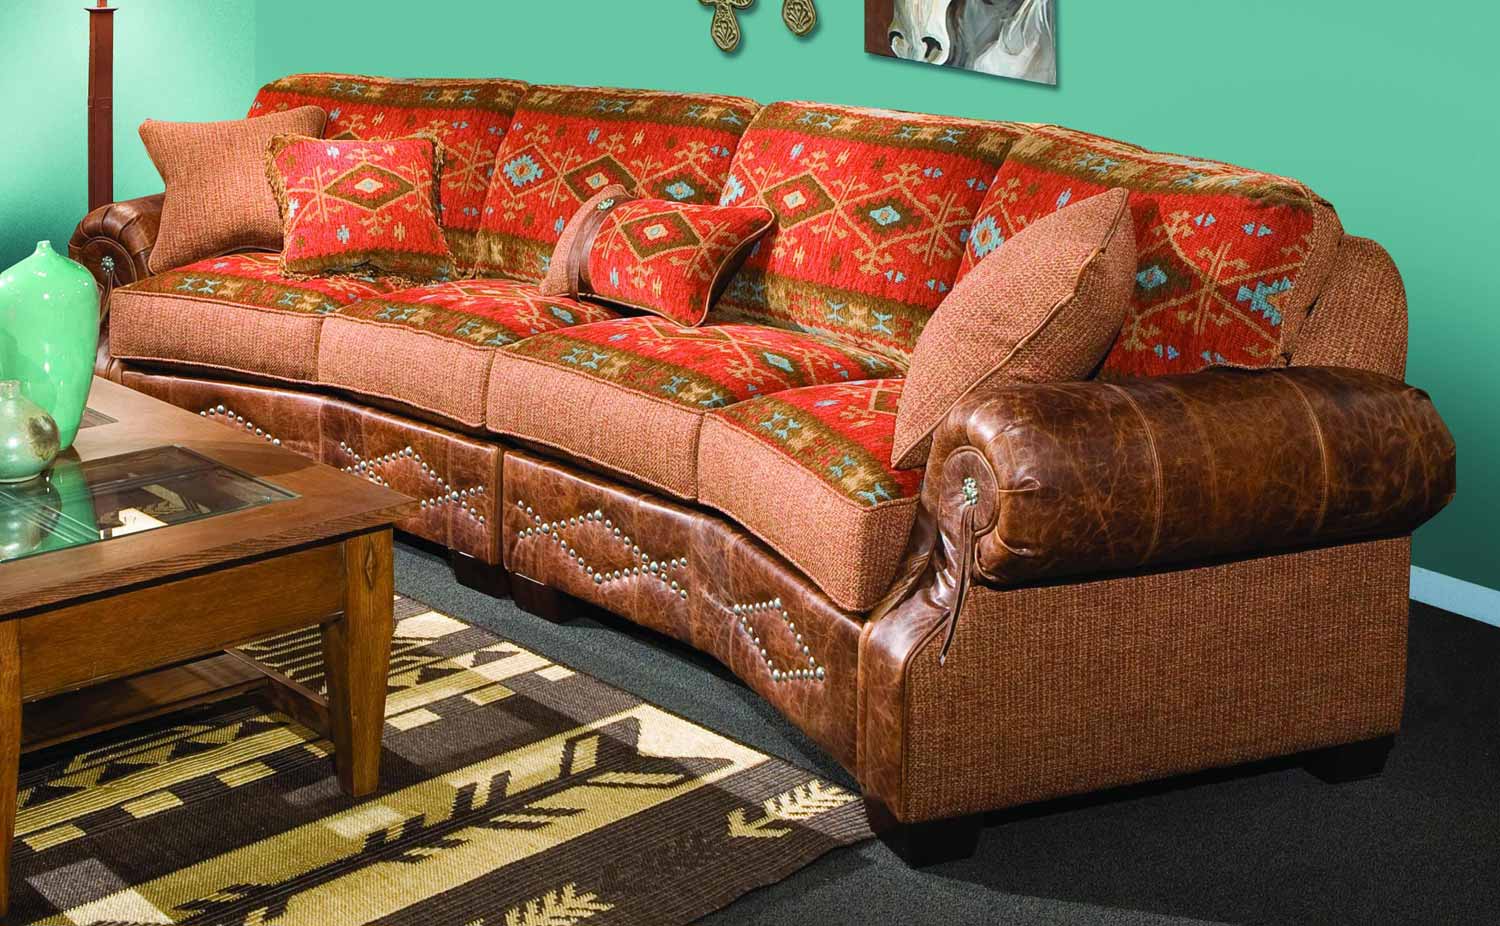 Chelsea Home Jackson 2 piece Sectional Sofa - Downing Harvest/Stagecoach Redwood